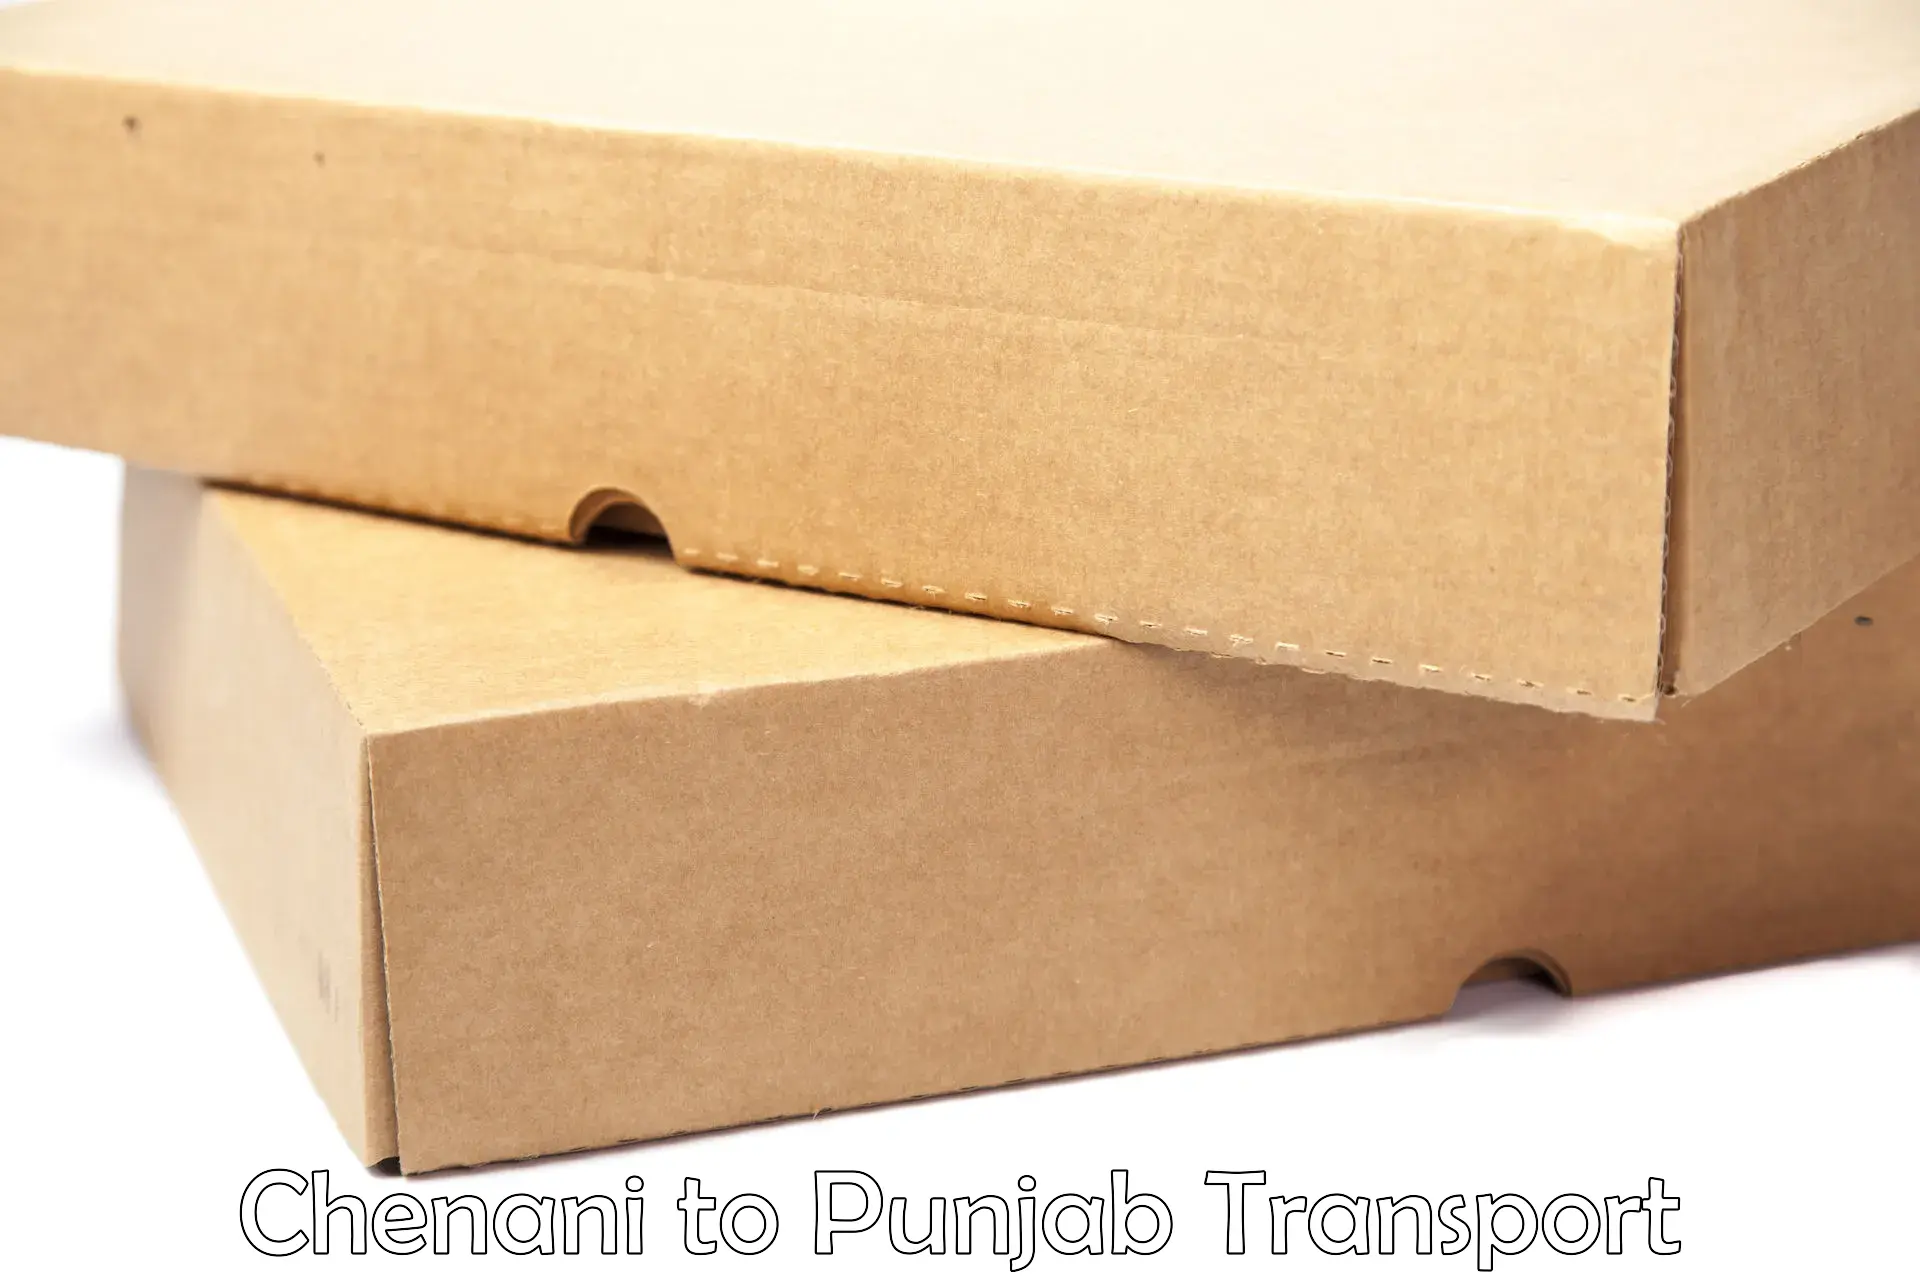 Transport shared services Chenani to Pathankot